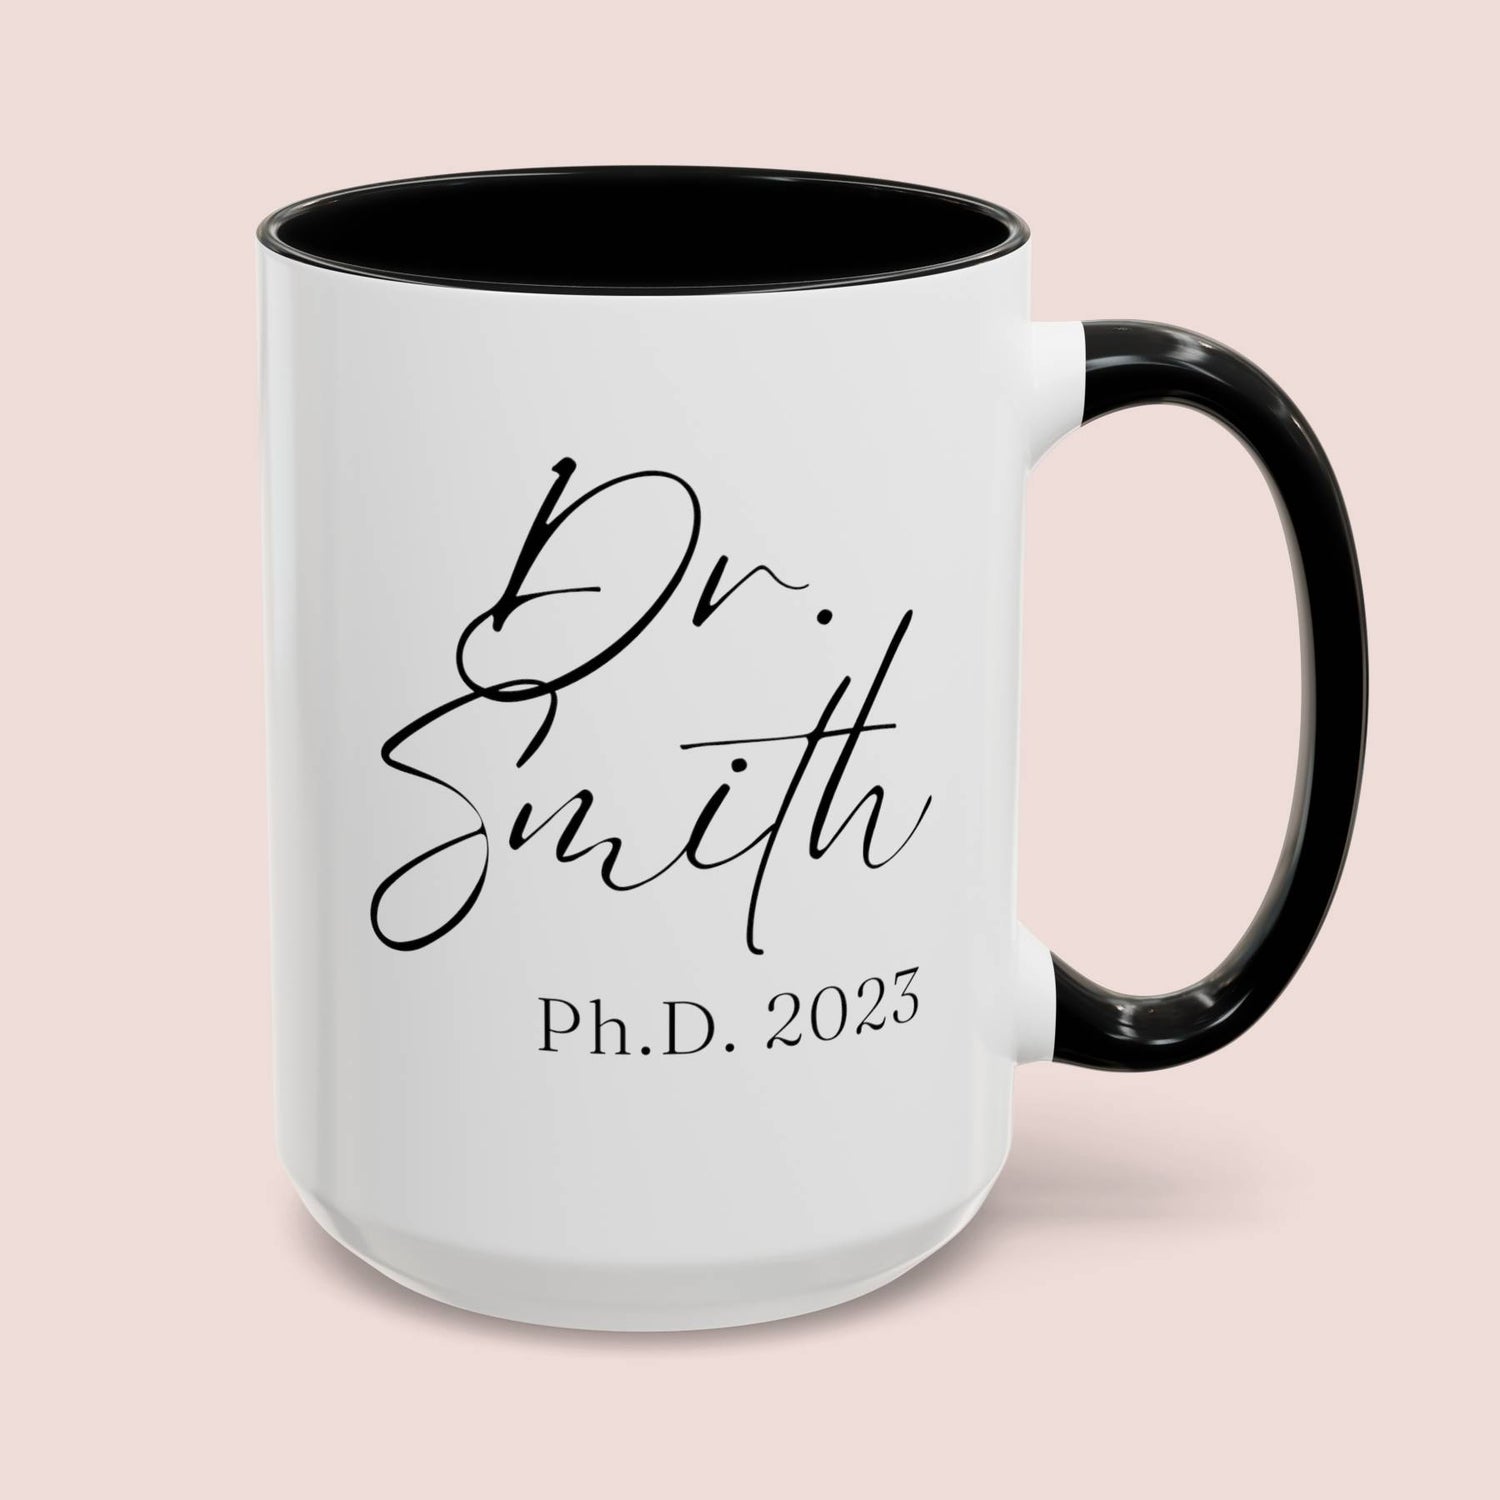 Dr Smith PHD Graduation 15oz white with black accent funny large coffee mug gift for doctorate degree graduate student grad custom name date personalized customize waveywares wavey wares wavywares wavy wares cover